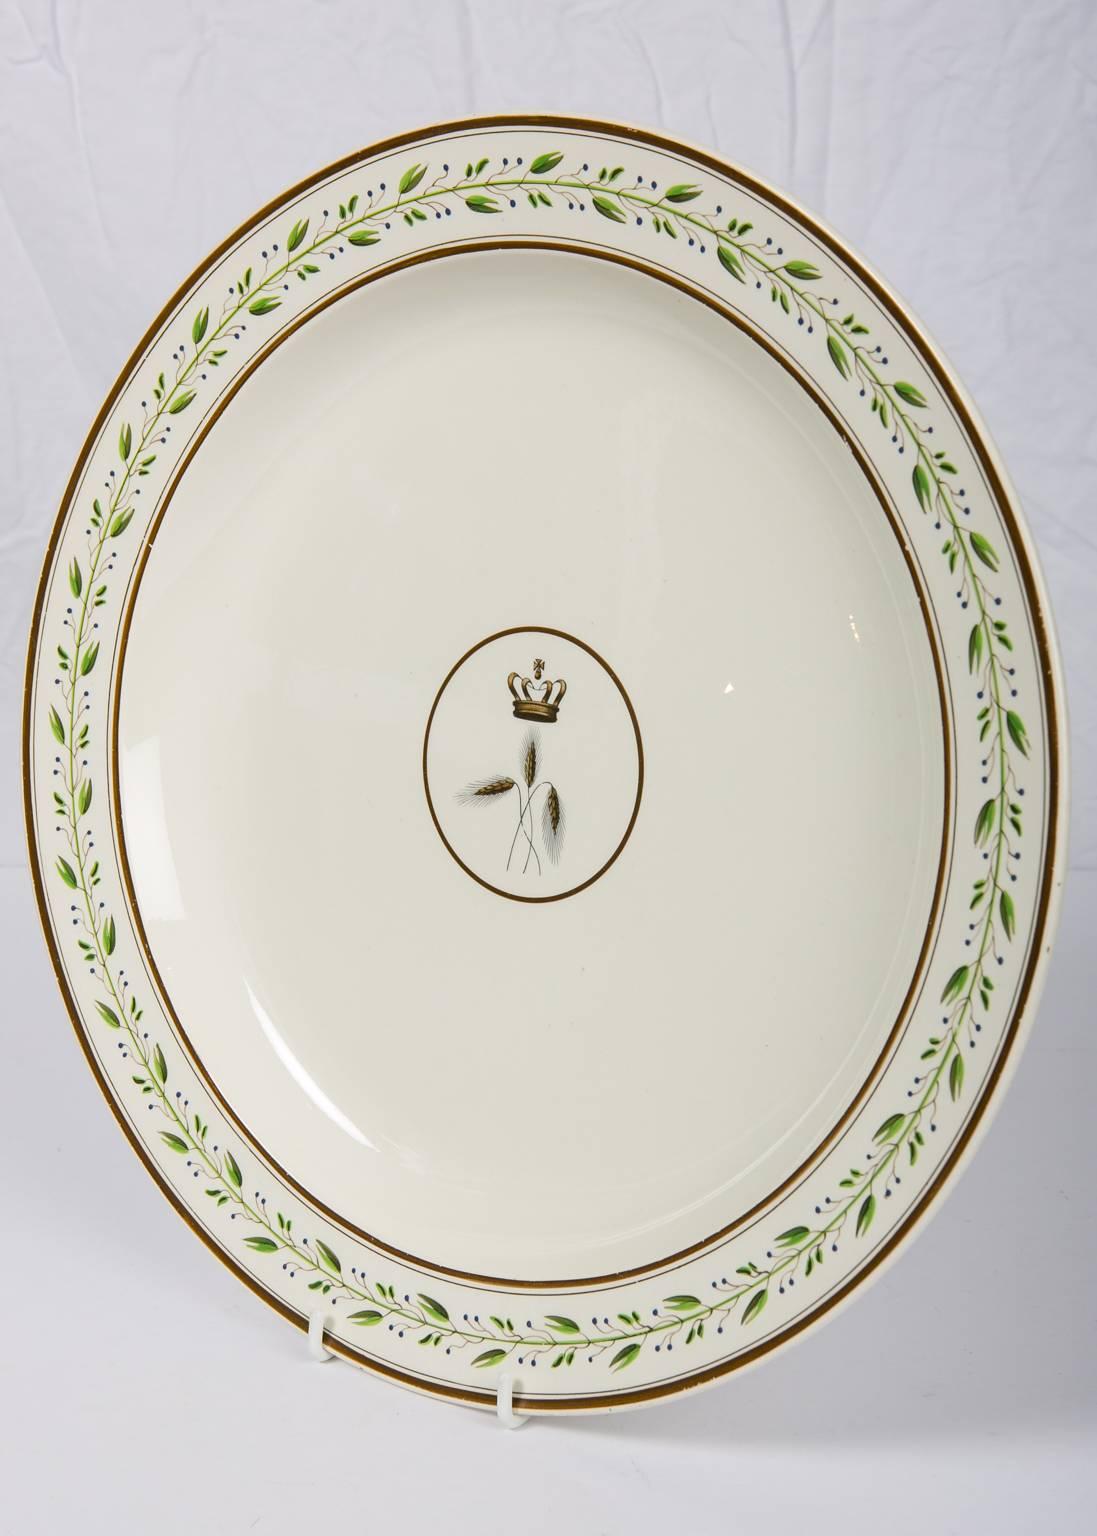 Painted Wedgwood Creamware Charger, Early 19th Century